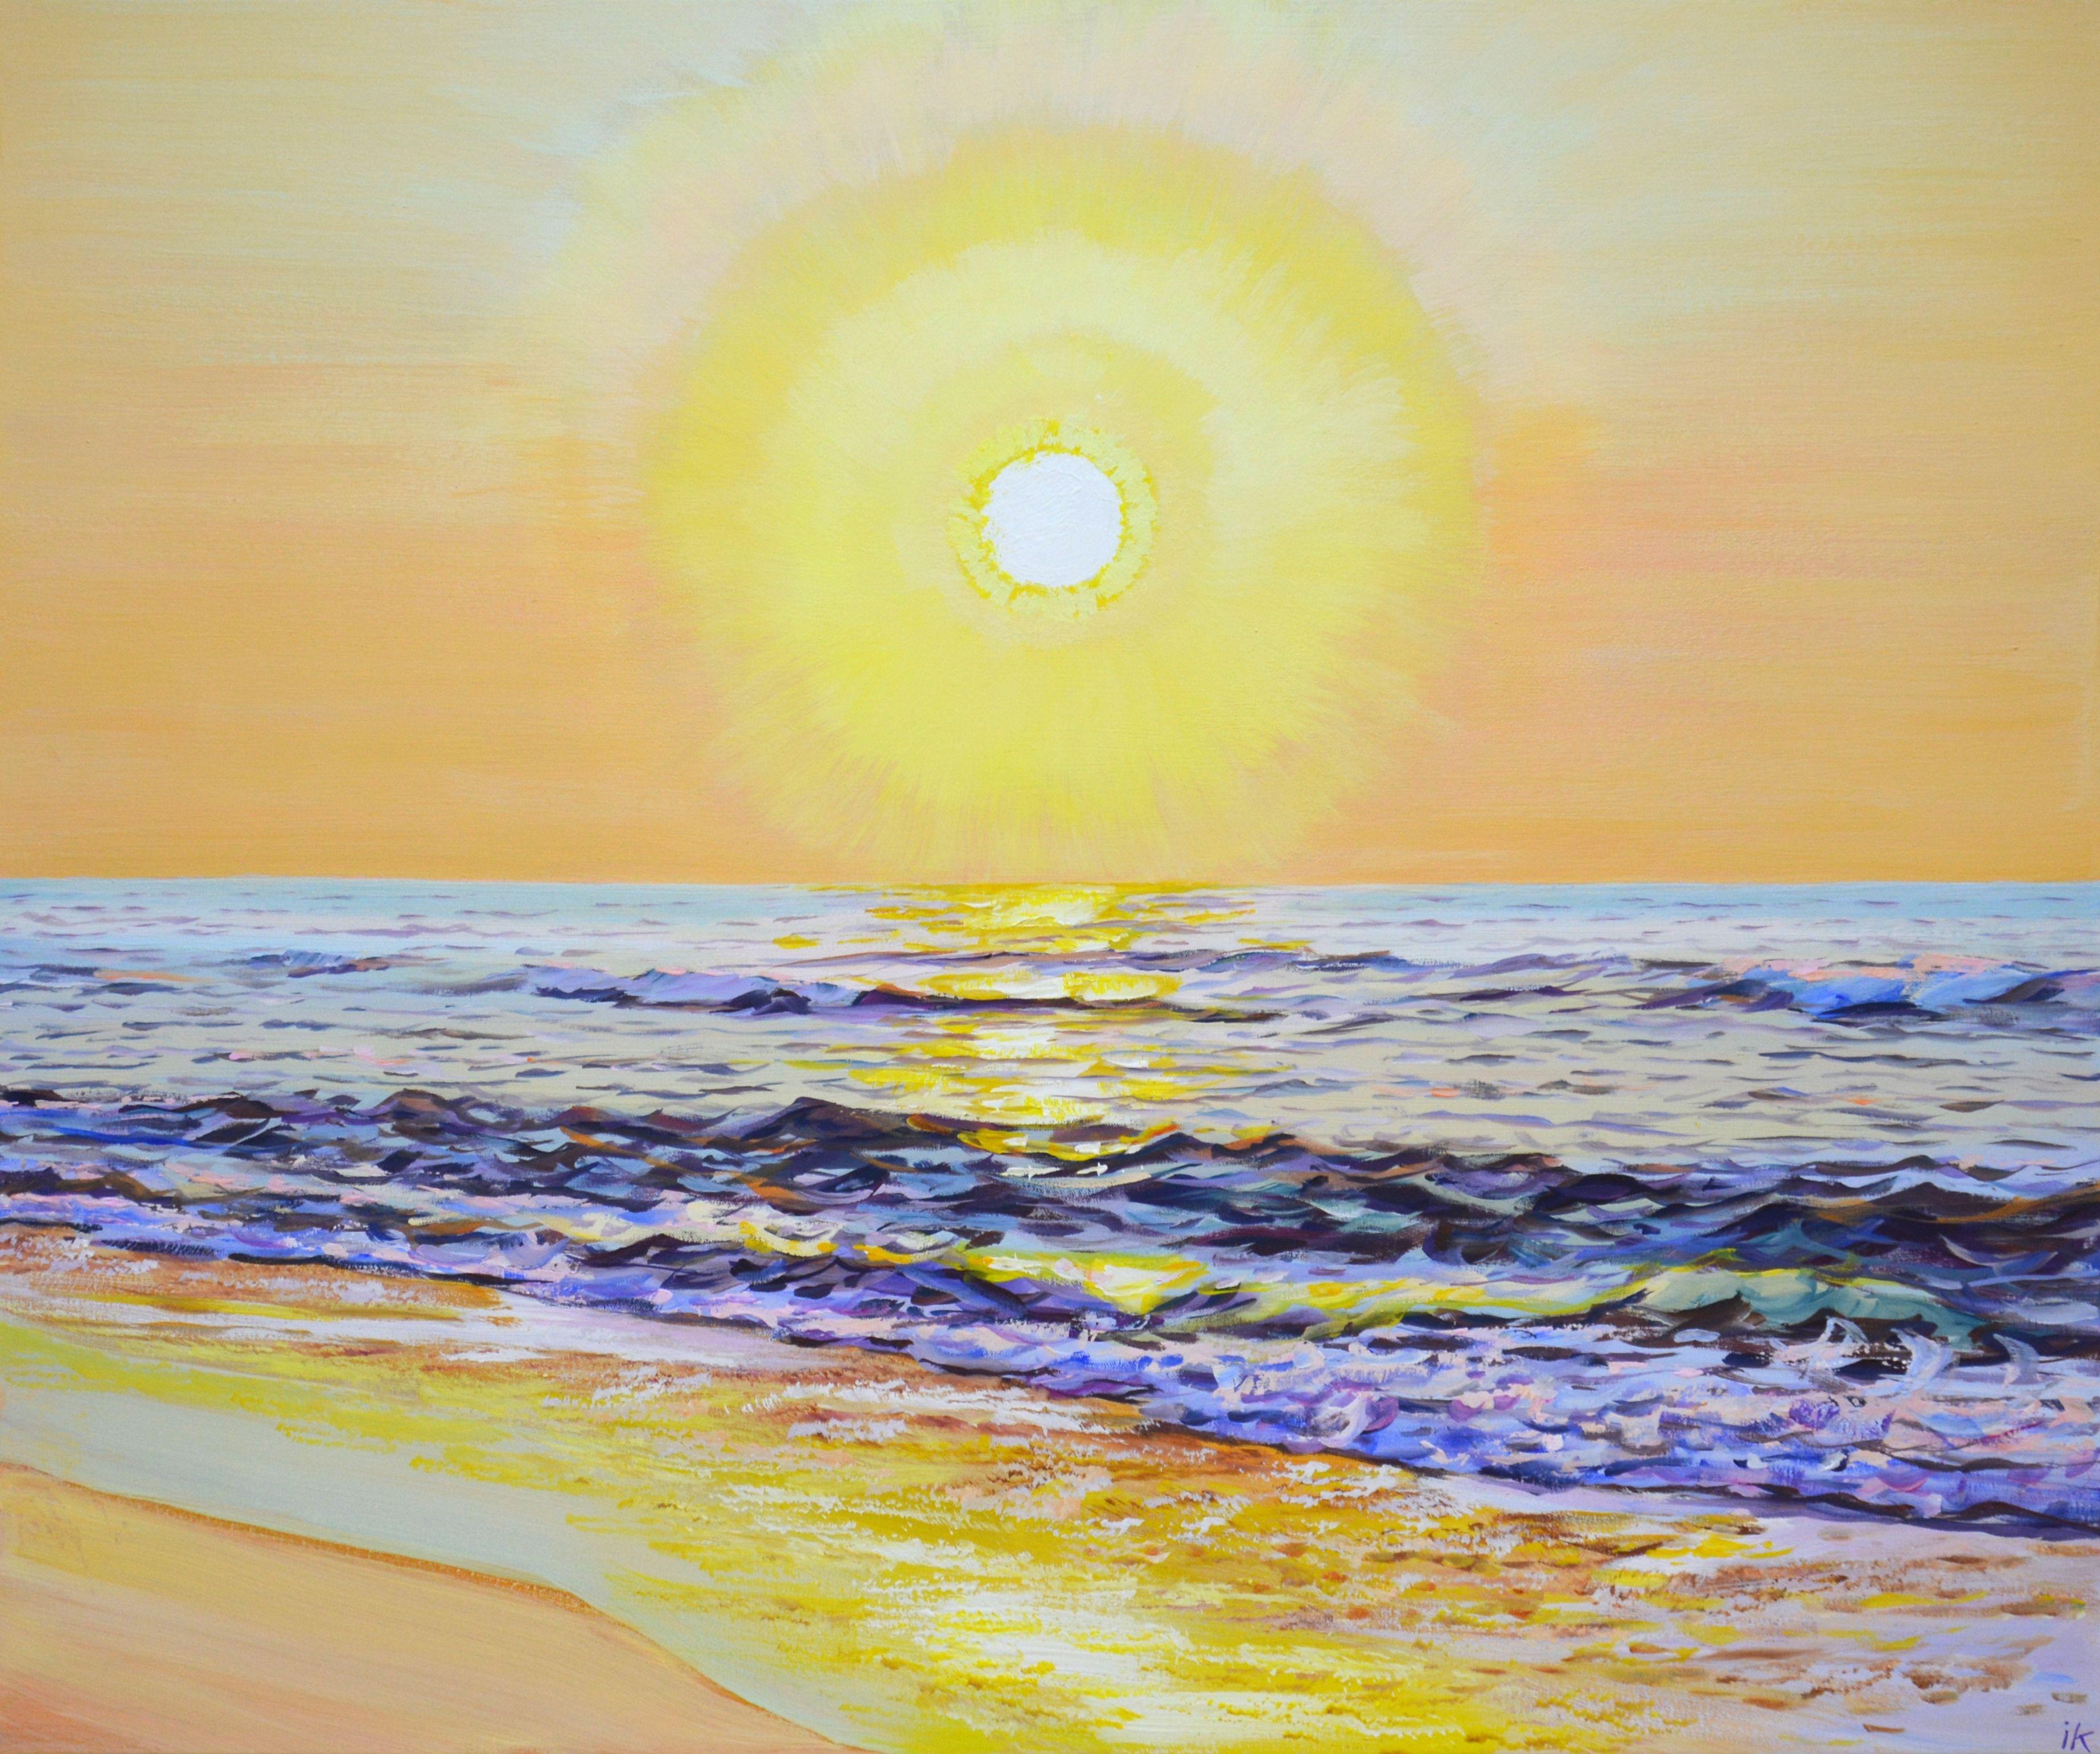 Warm sunset over the ocean. Blue water, sea, ocean, waves, sun glare on the water, clear warm sky, warm sand, beach create an atmosphere of relaxation and romance. Light flickers on the surface of the water, creating a serene look. Made in the style